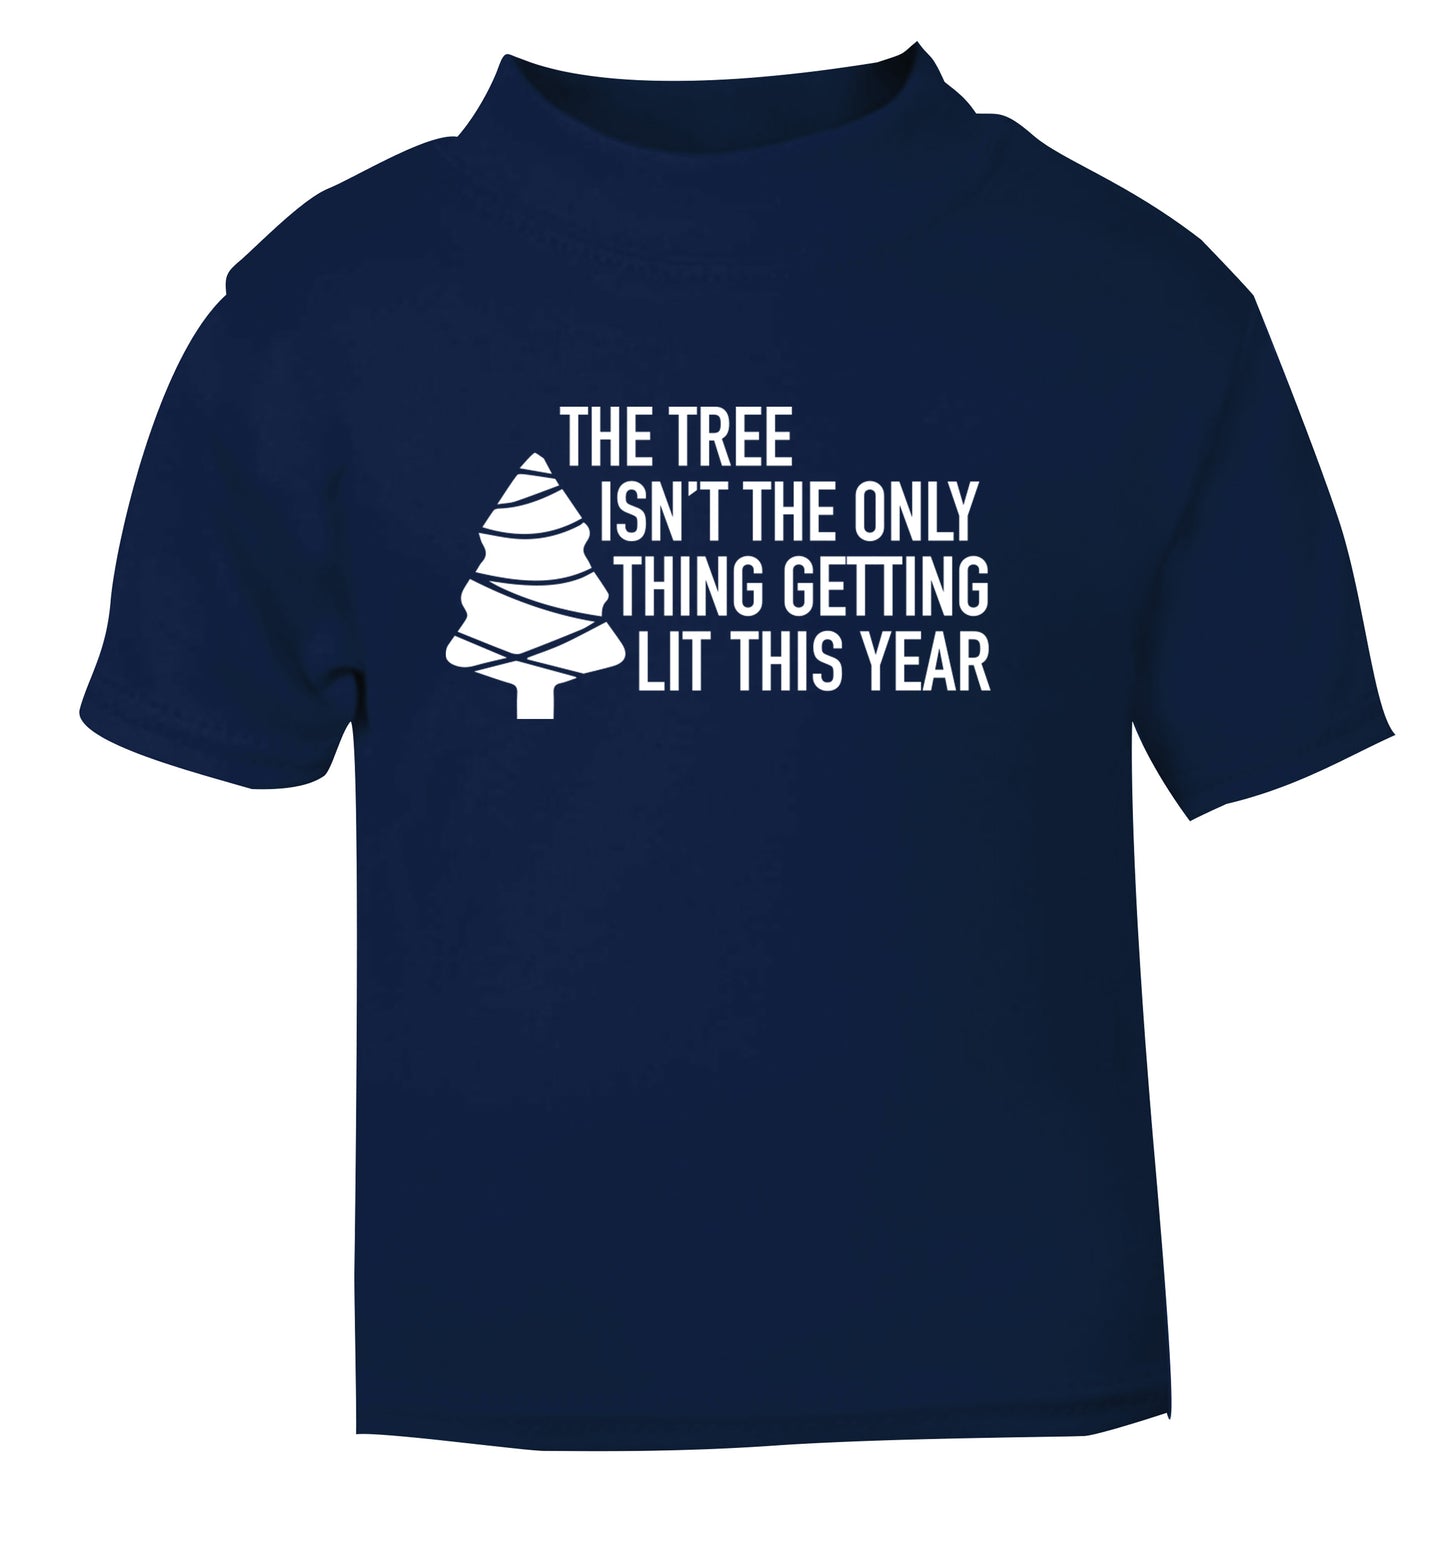 The tree isn't the only thing getting lit this year navy Baby Toddler Tshirt 2 Years